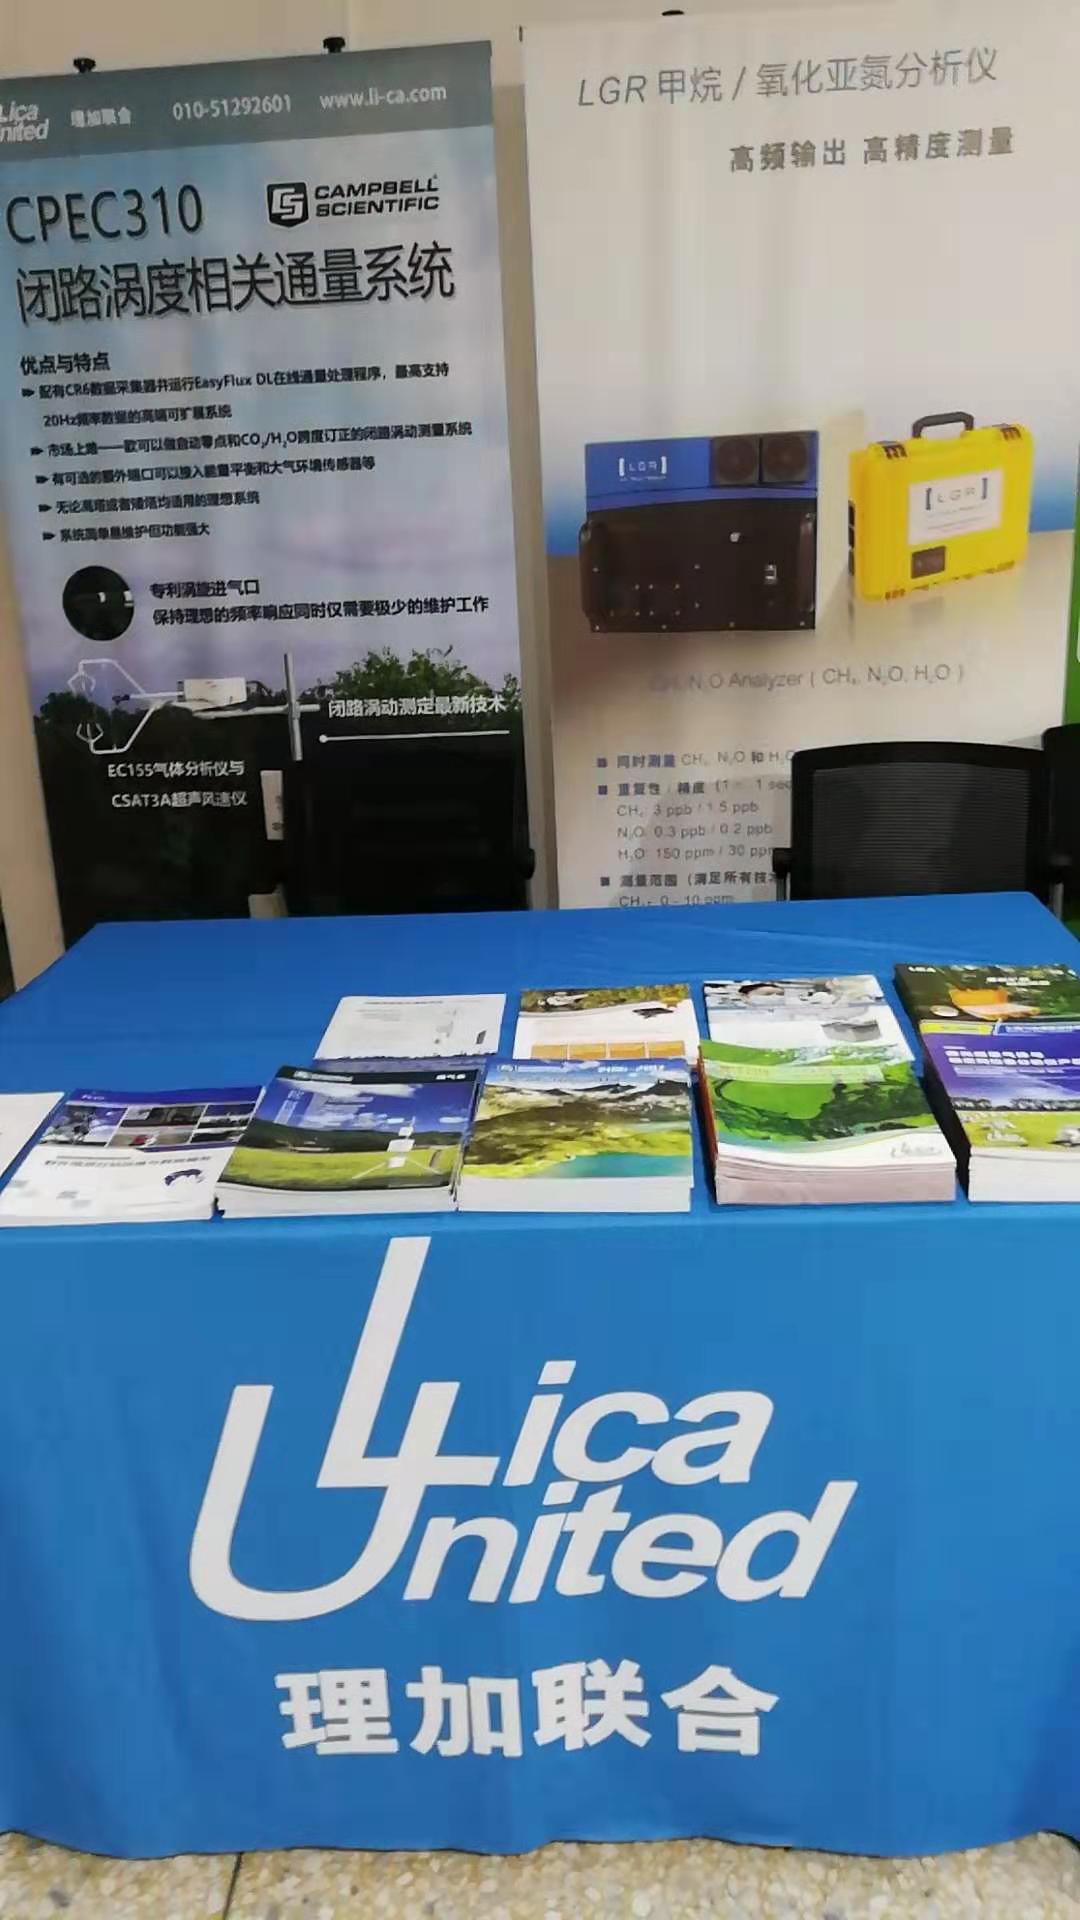 LICA attended the 5th Symposium on Young Scholars in Terrestrial Ecosystems